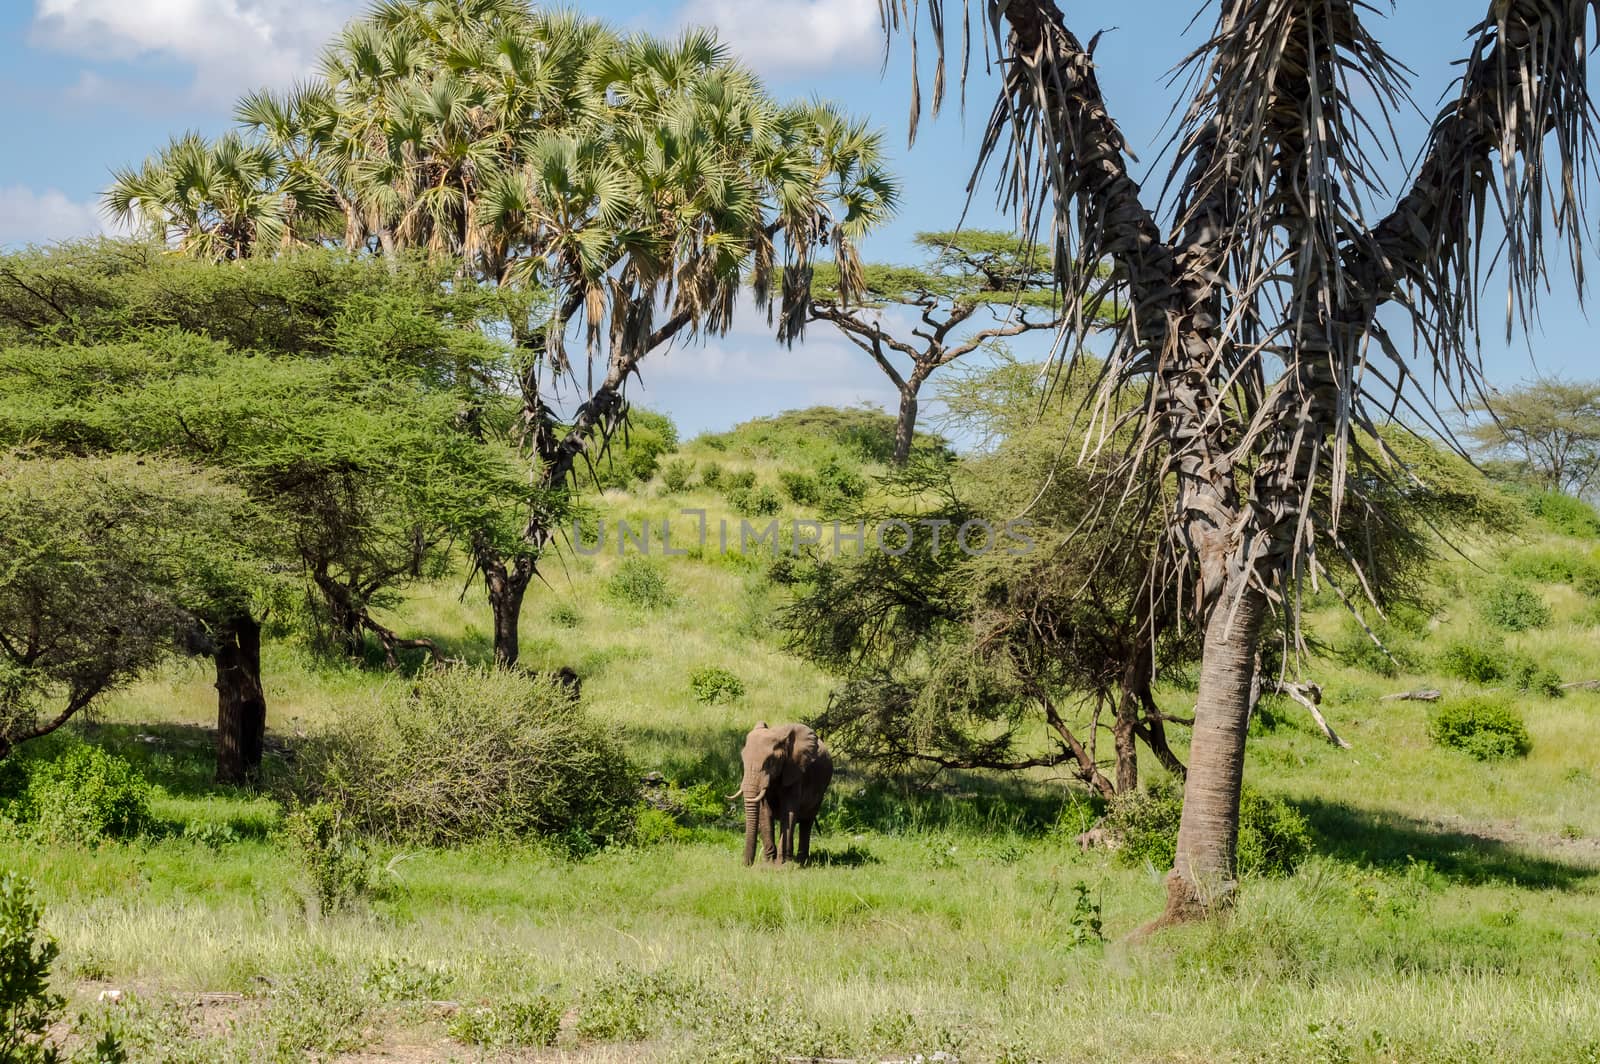 An isolated elephant in the natural habitat of the African savan by Philou1000